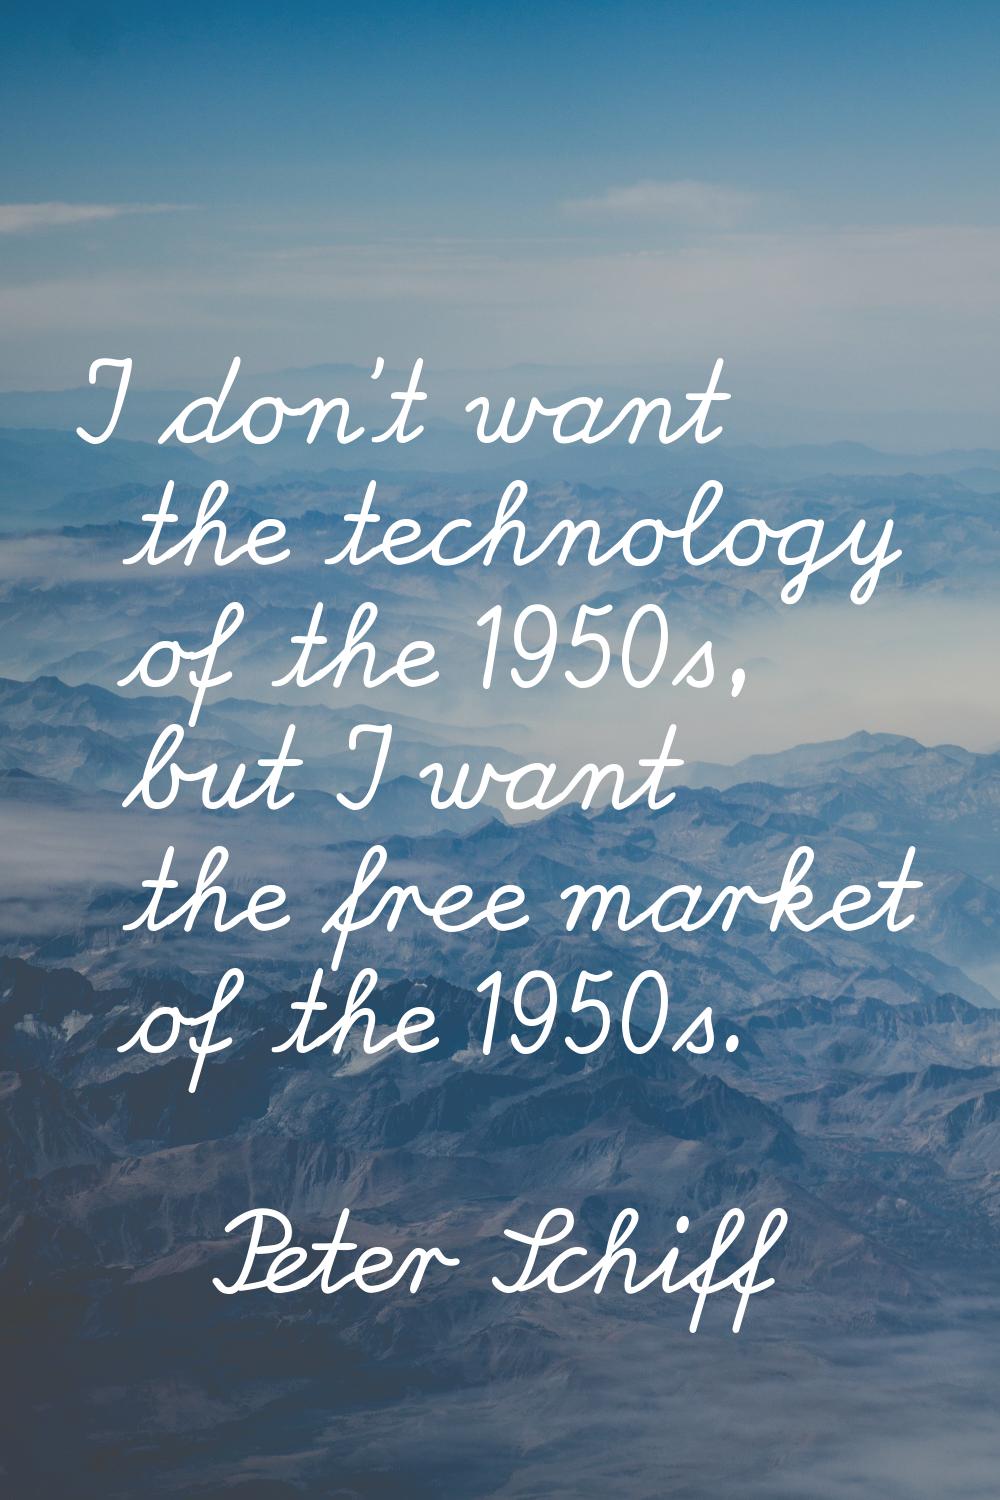 I don't want the technology of the 1950s, but I want the free market of the 1950s.